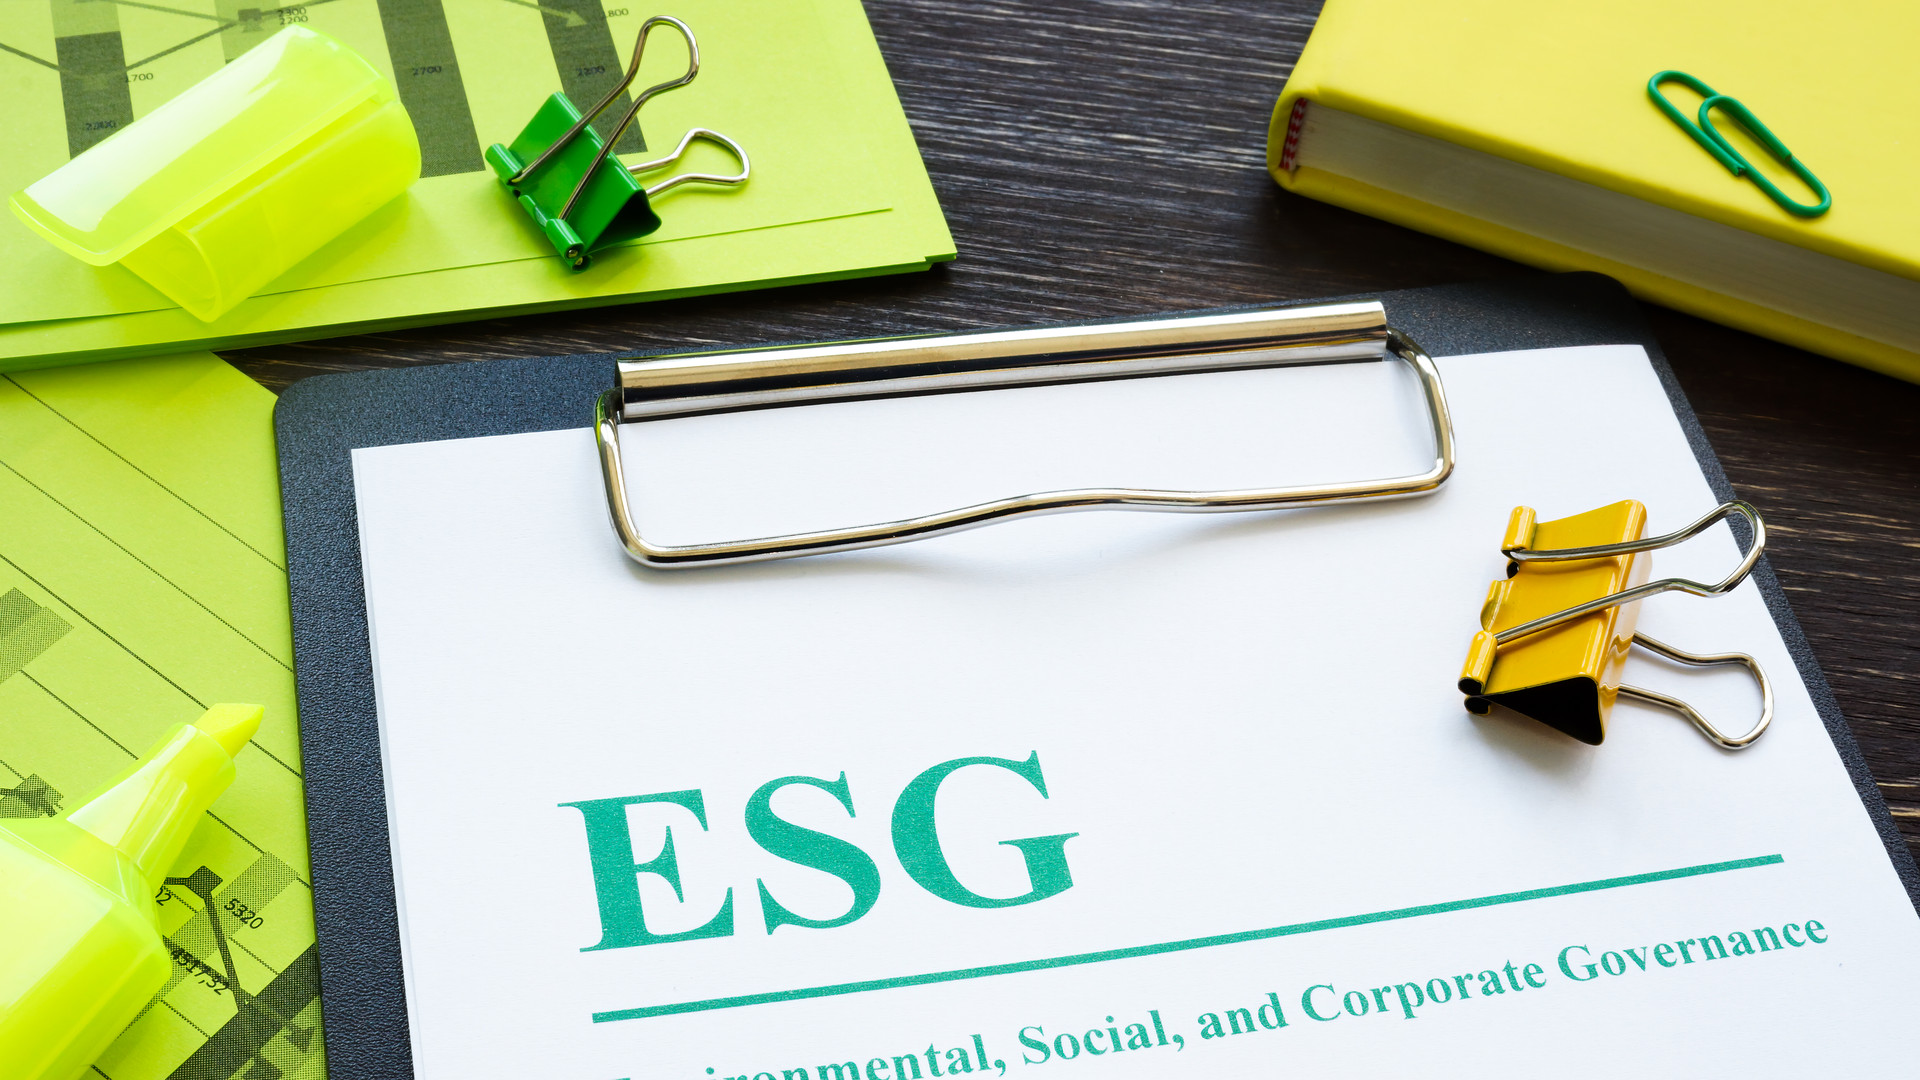 Papers about ESG Environmental, Social and Corporate Governance and notepad.